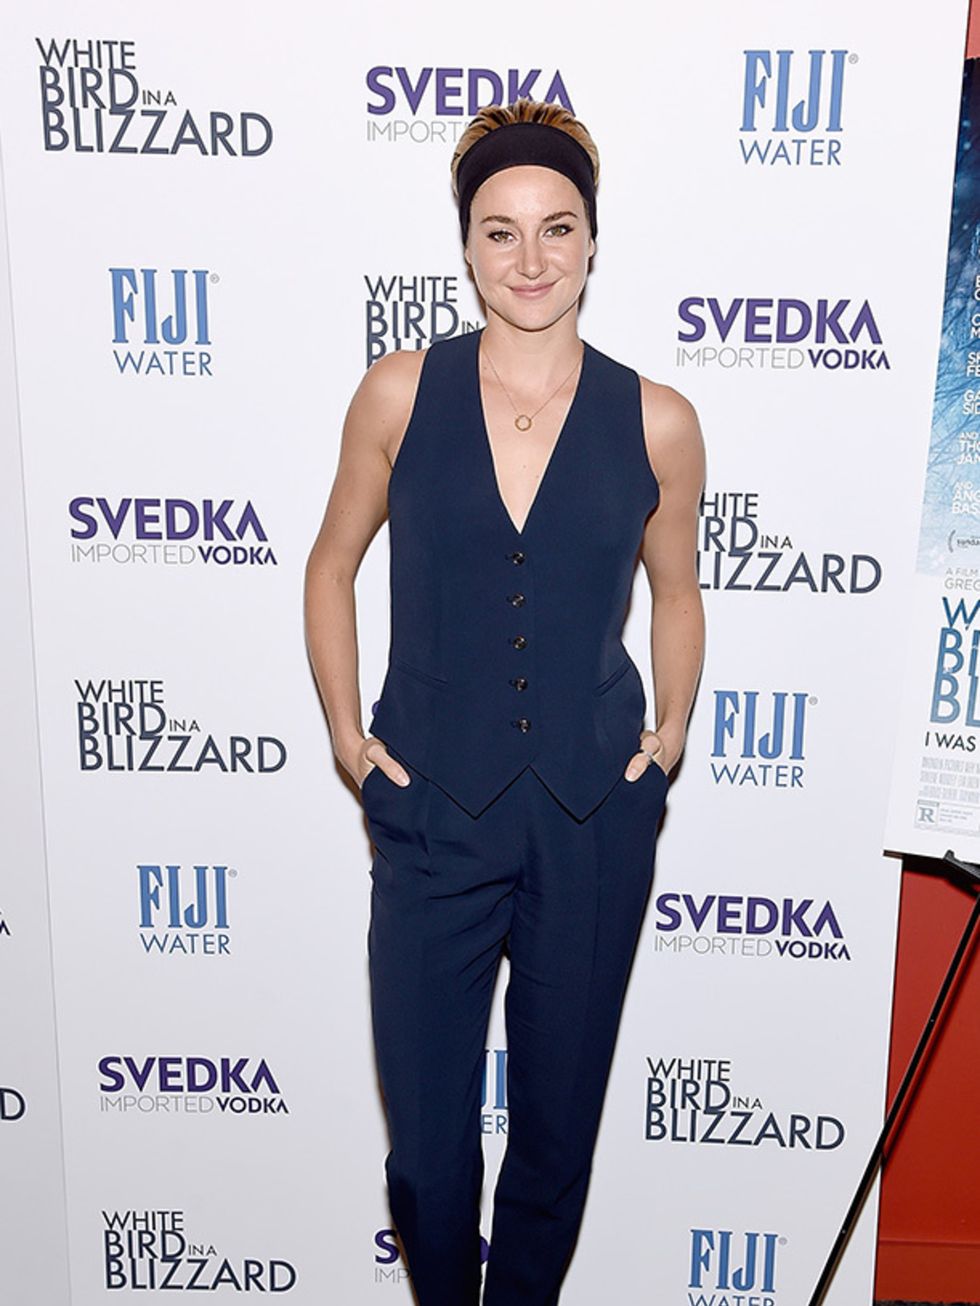 Shailene Woodley wearing Temperley London Spring 2015 to the White Bird in a Blizzard film screening in New York, October 2014